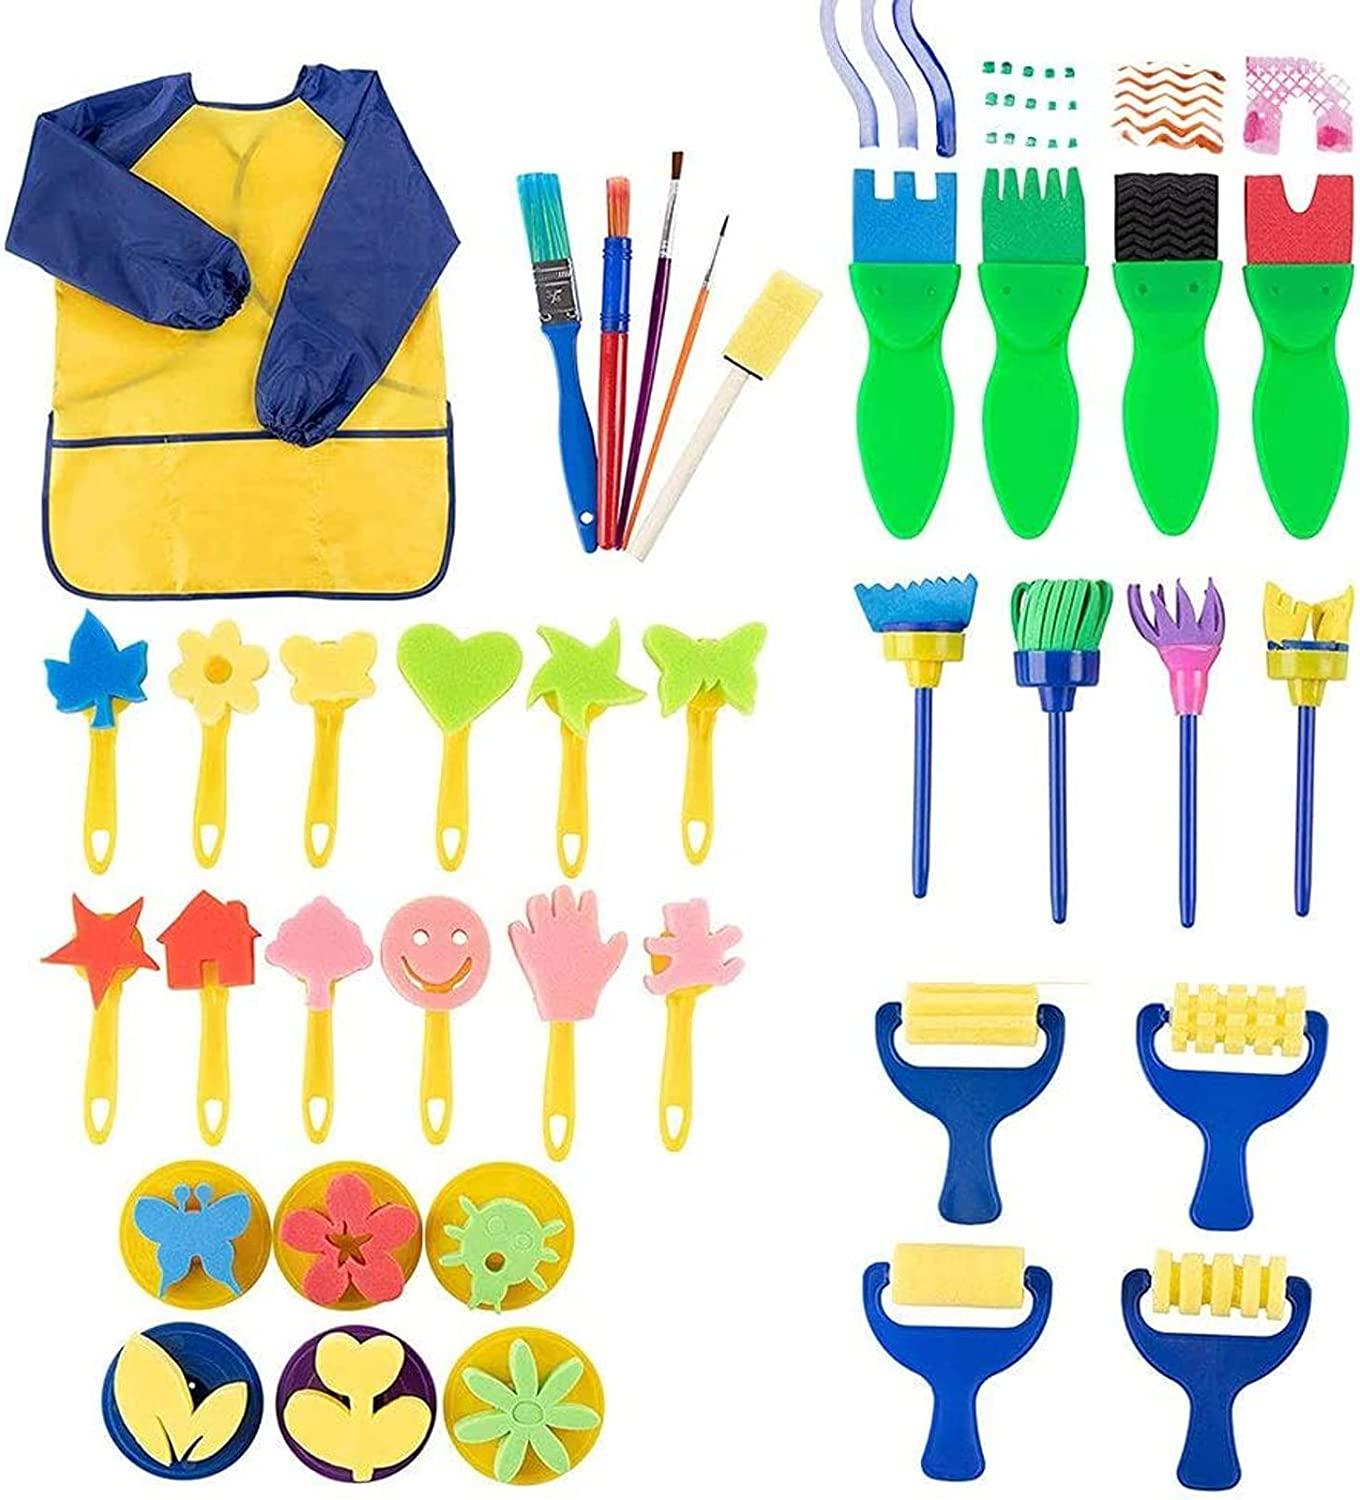 Imagine Studios, Kids Paint Set - 36-Piece Paint Sponge, Paint Brush, Foam Brayer and Artist Apron, for Kids Toddler Art Craft DIY Project, Learning Drawing Supplies, Painting Tools, Assorted Designs